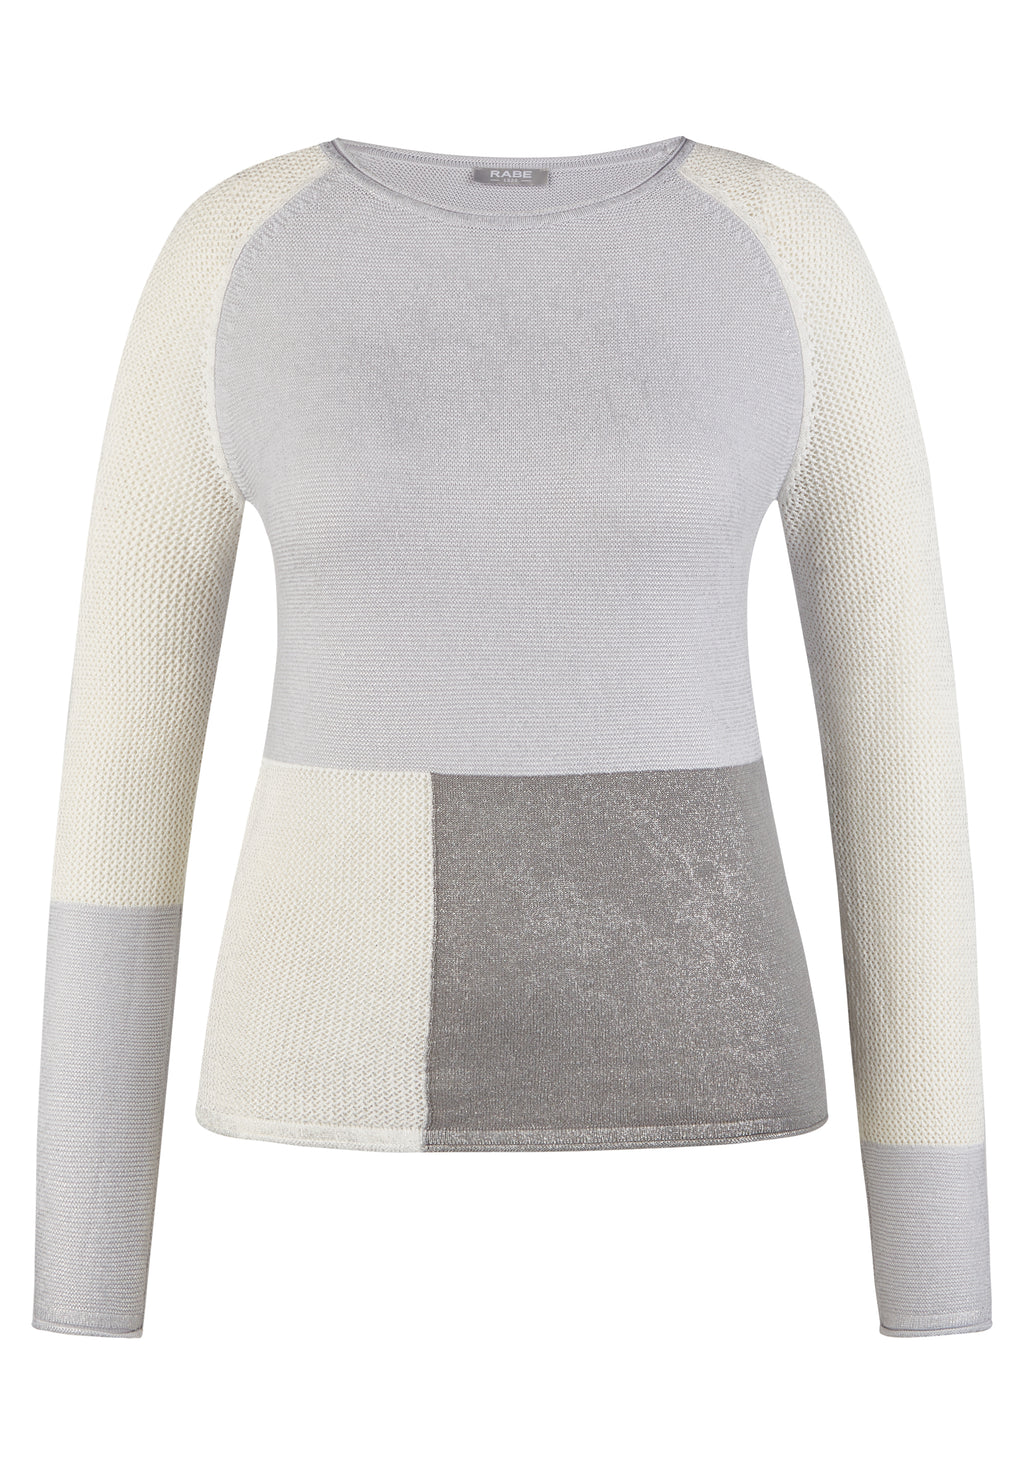 Rabe magnolia park collection block knit jumper in grey, product code 52-113600